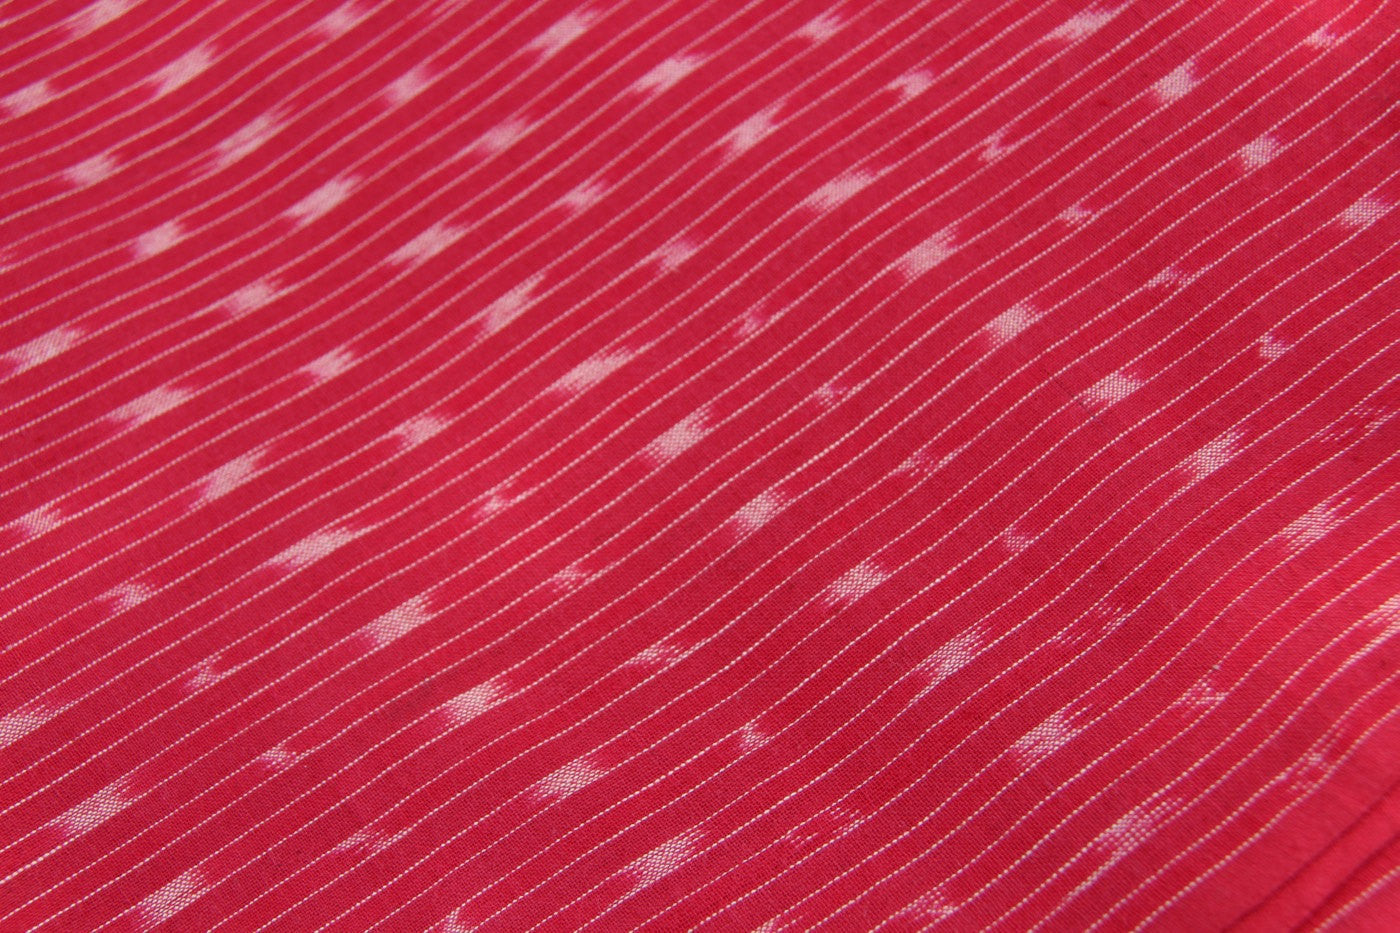 Red Ikat Handloom Traditional Indian Fabric, Hand-Dyed Cotton, Hand Woven Light Weight Fabric for Sewing, Designer Quality, 1 Yard x 43" - ShopWomanShopsWorld.com. Bone Beads, Tassels, Pom Poms, African Beads.